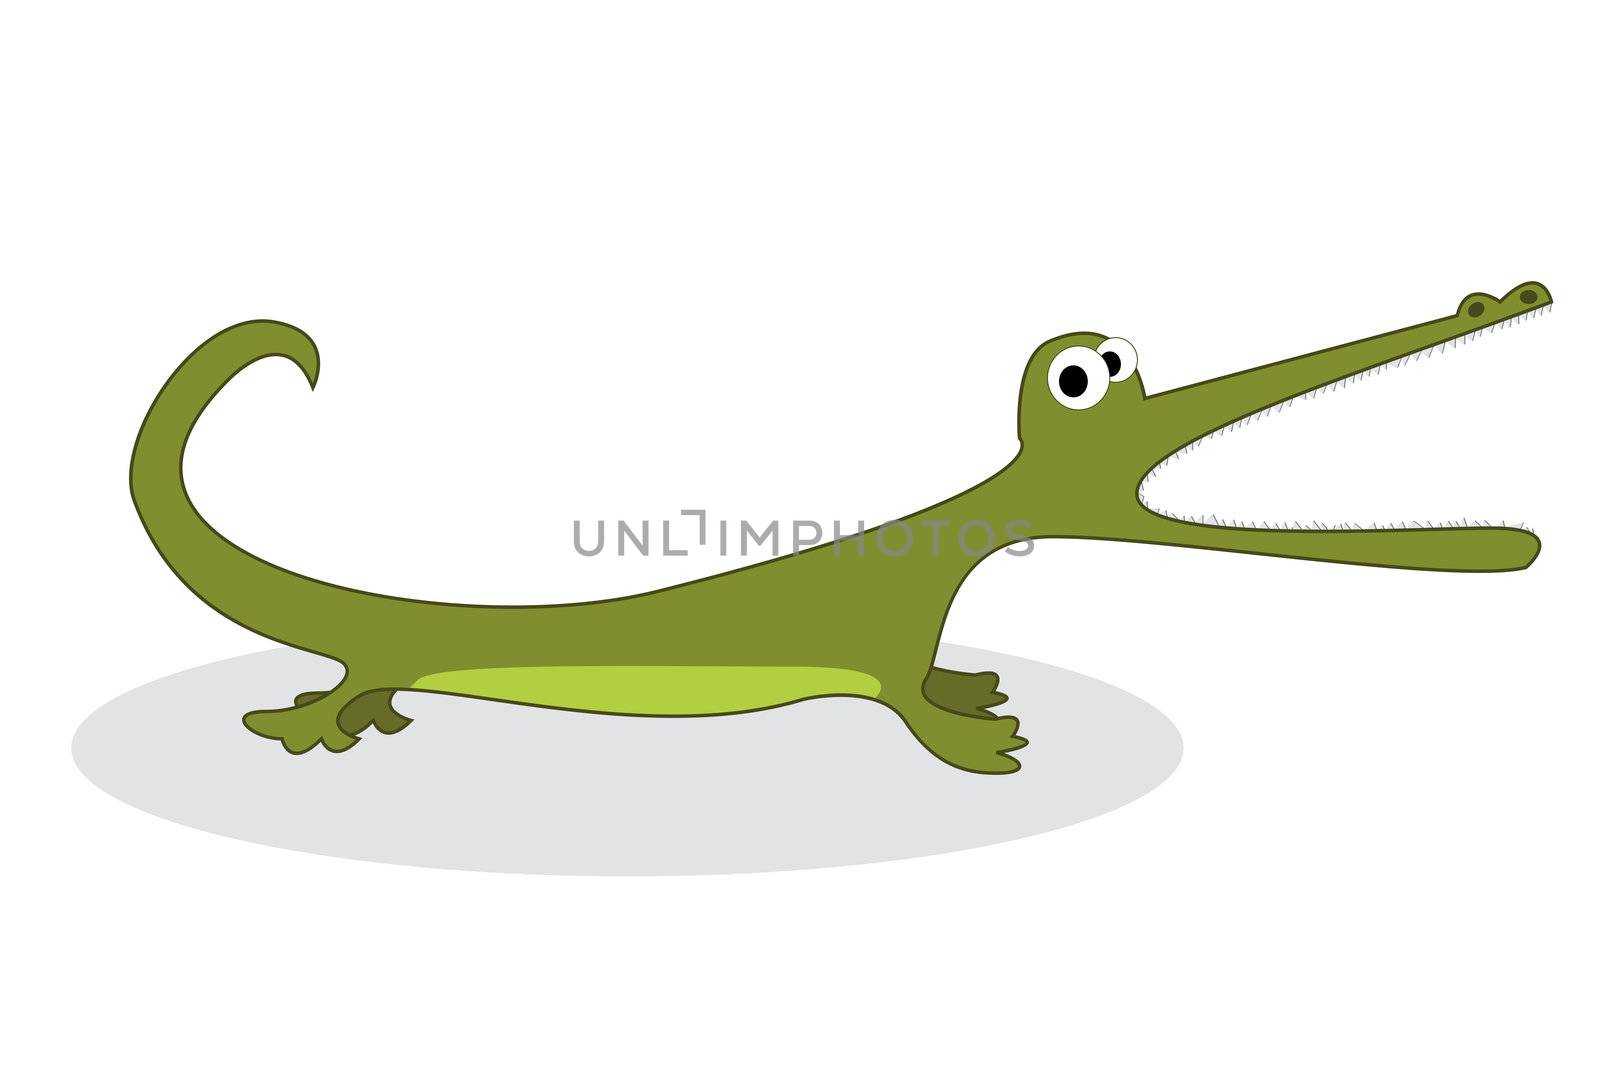 Clip art crocodile, isolated object over white background